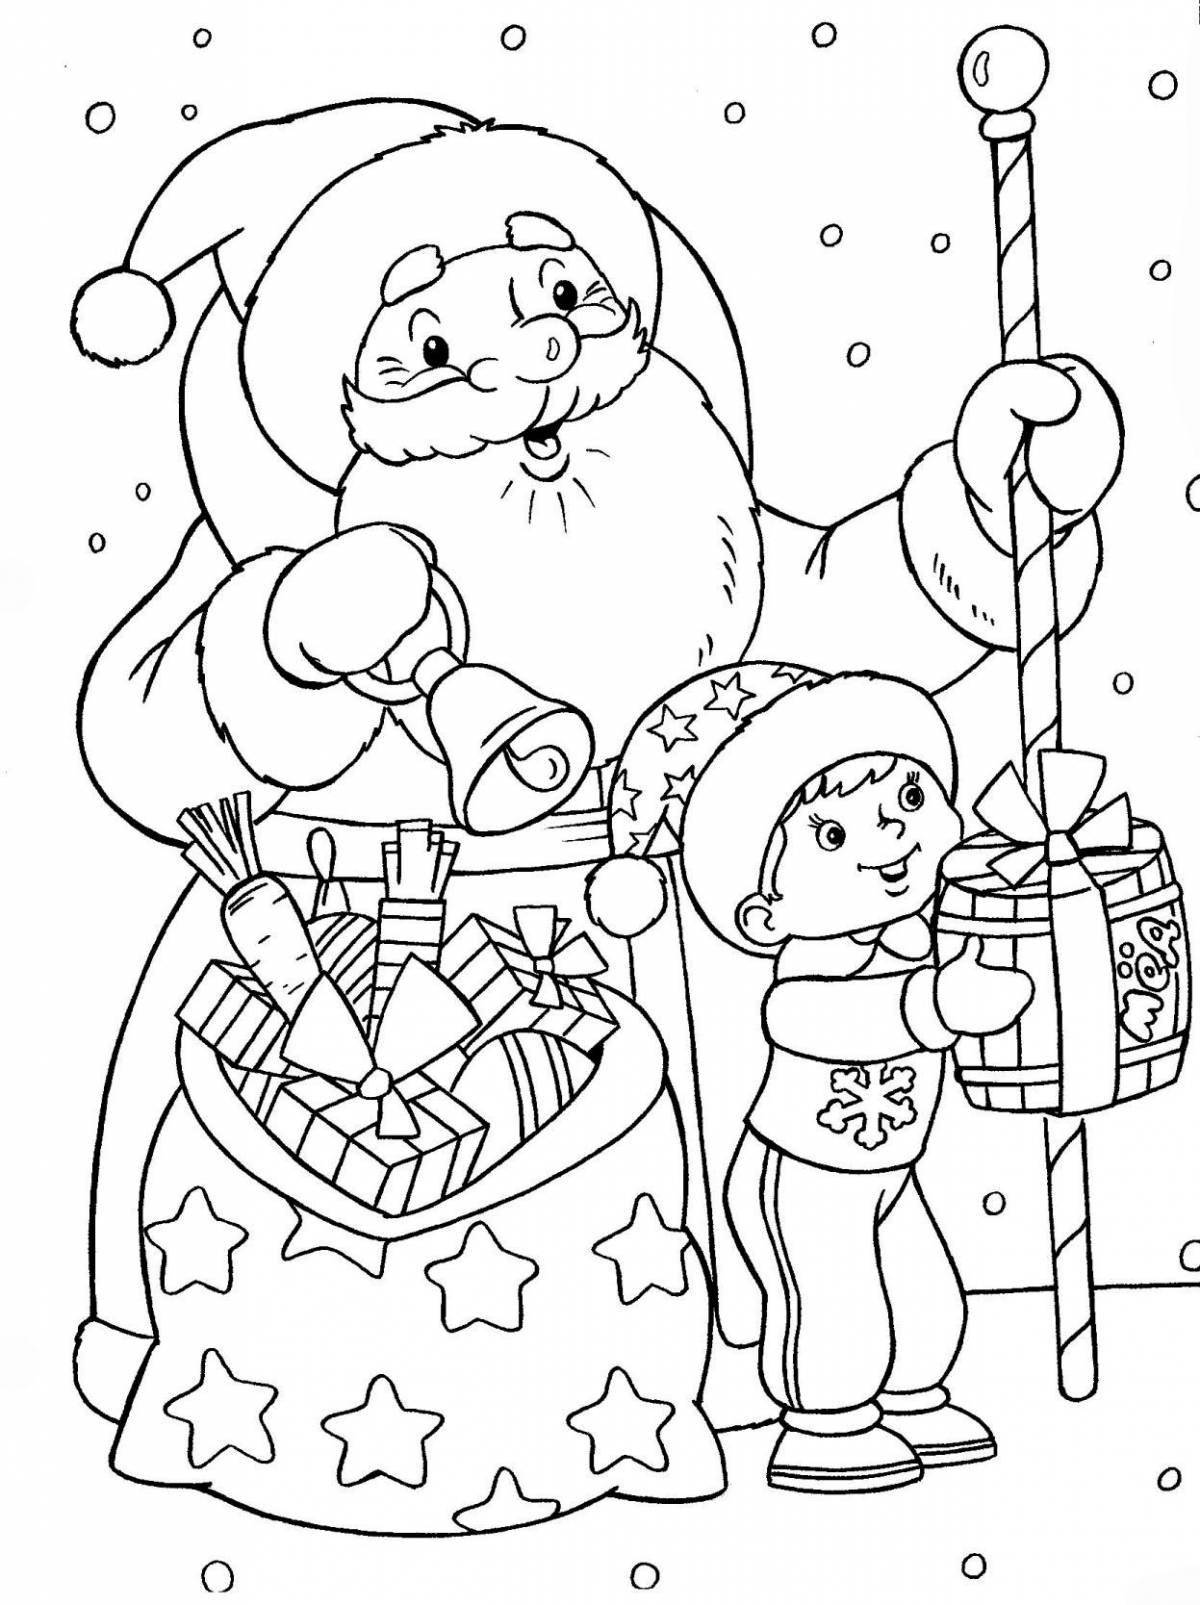 Exotic coloring book Santa Claus and Snow Maiden